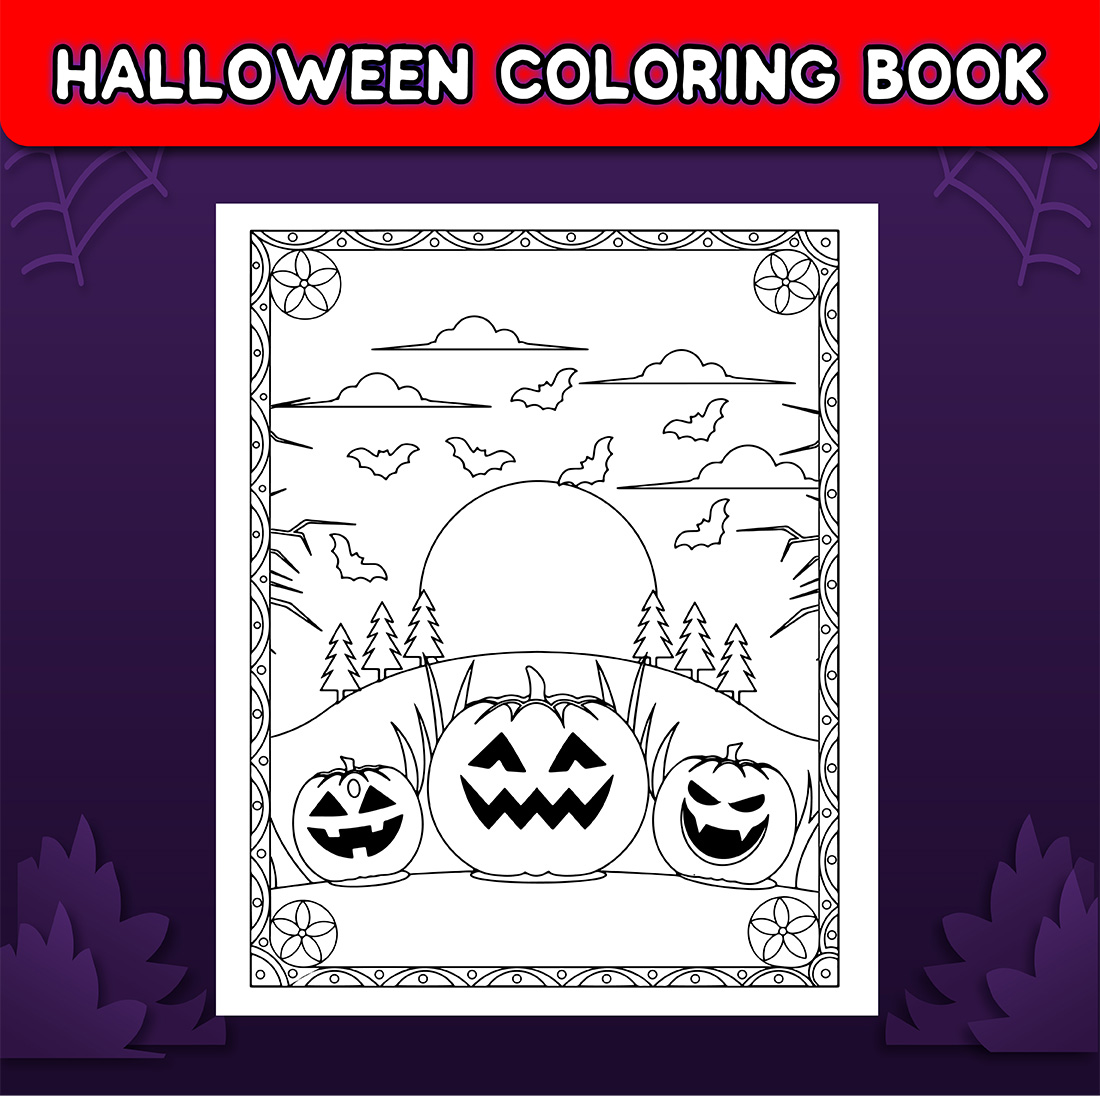 Halloween Coloring Page for Kids cover image.